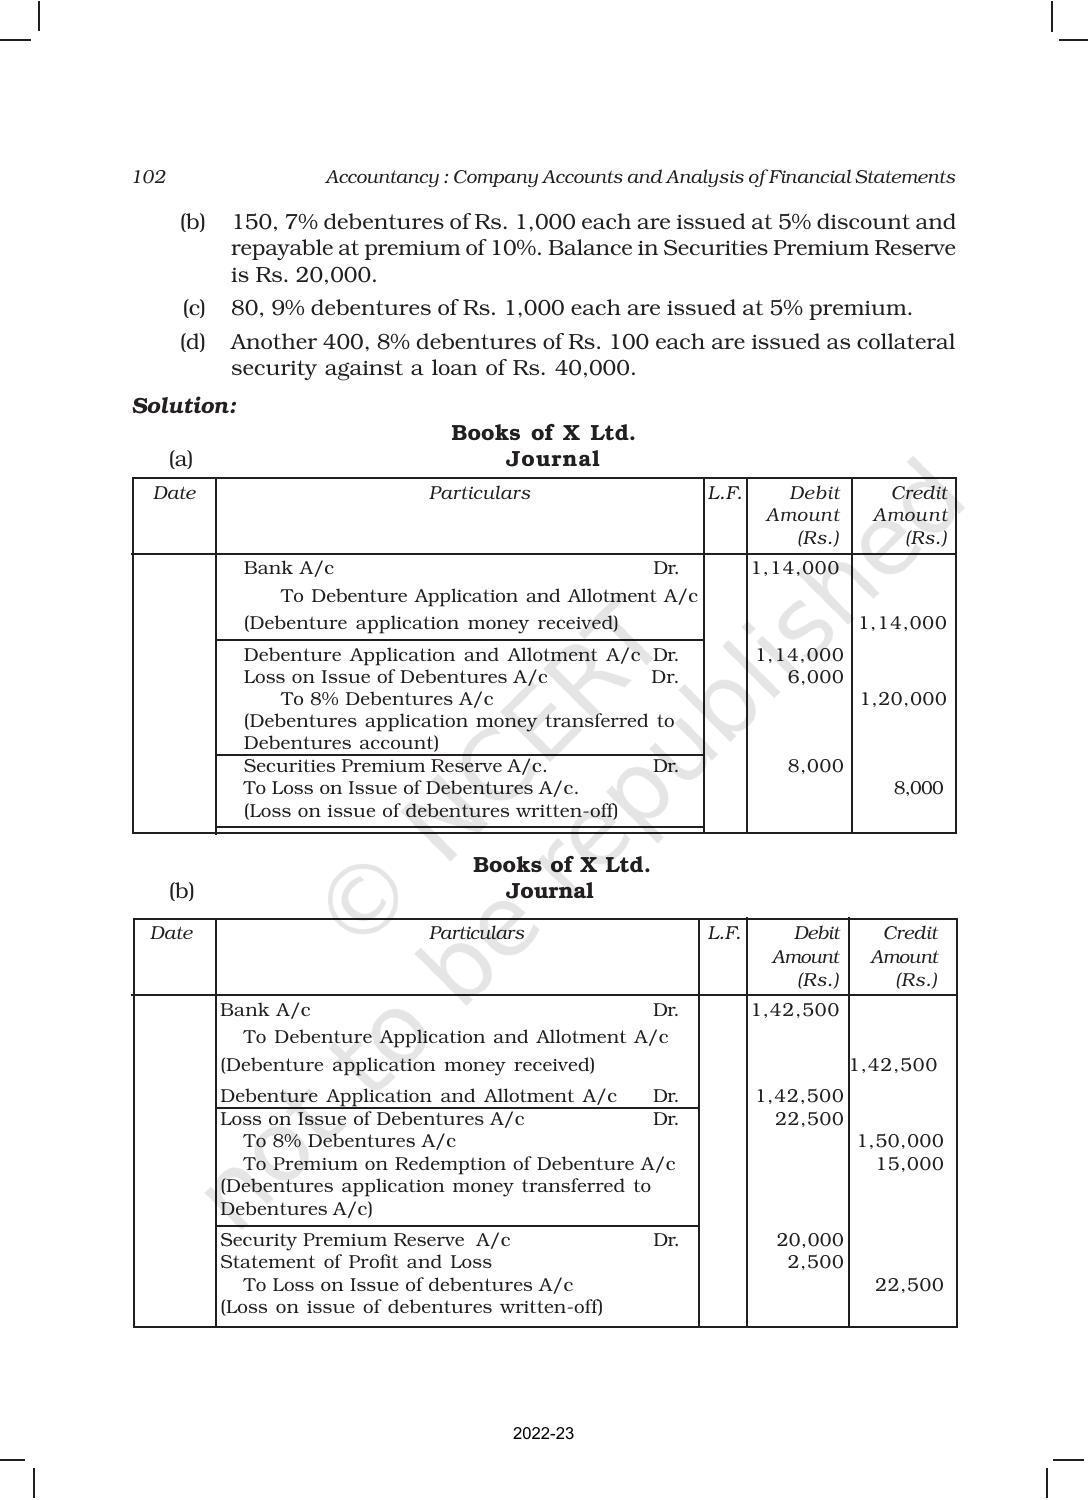 NCERT Book for Class 12 Accountancy Part II Chapter 1 Issue and Redemption of Debentures - Page 28